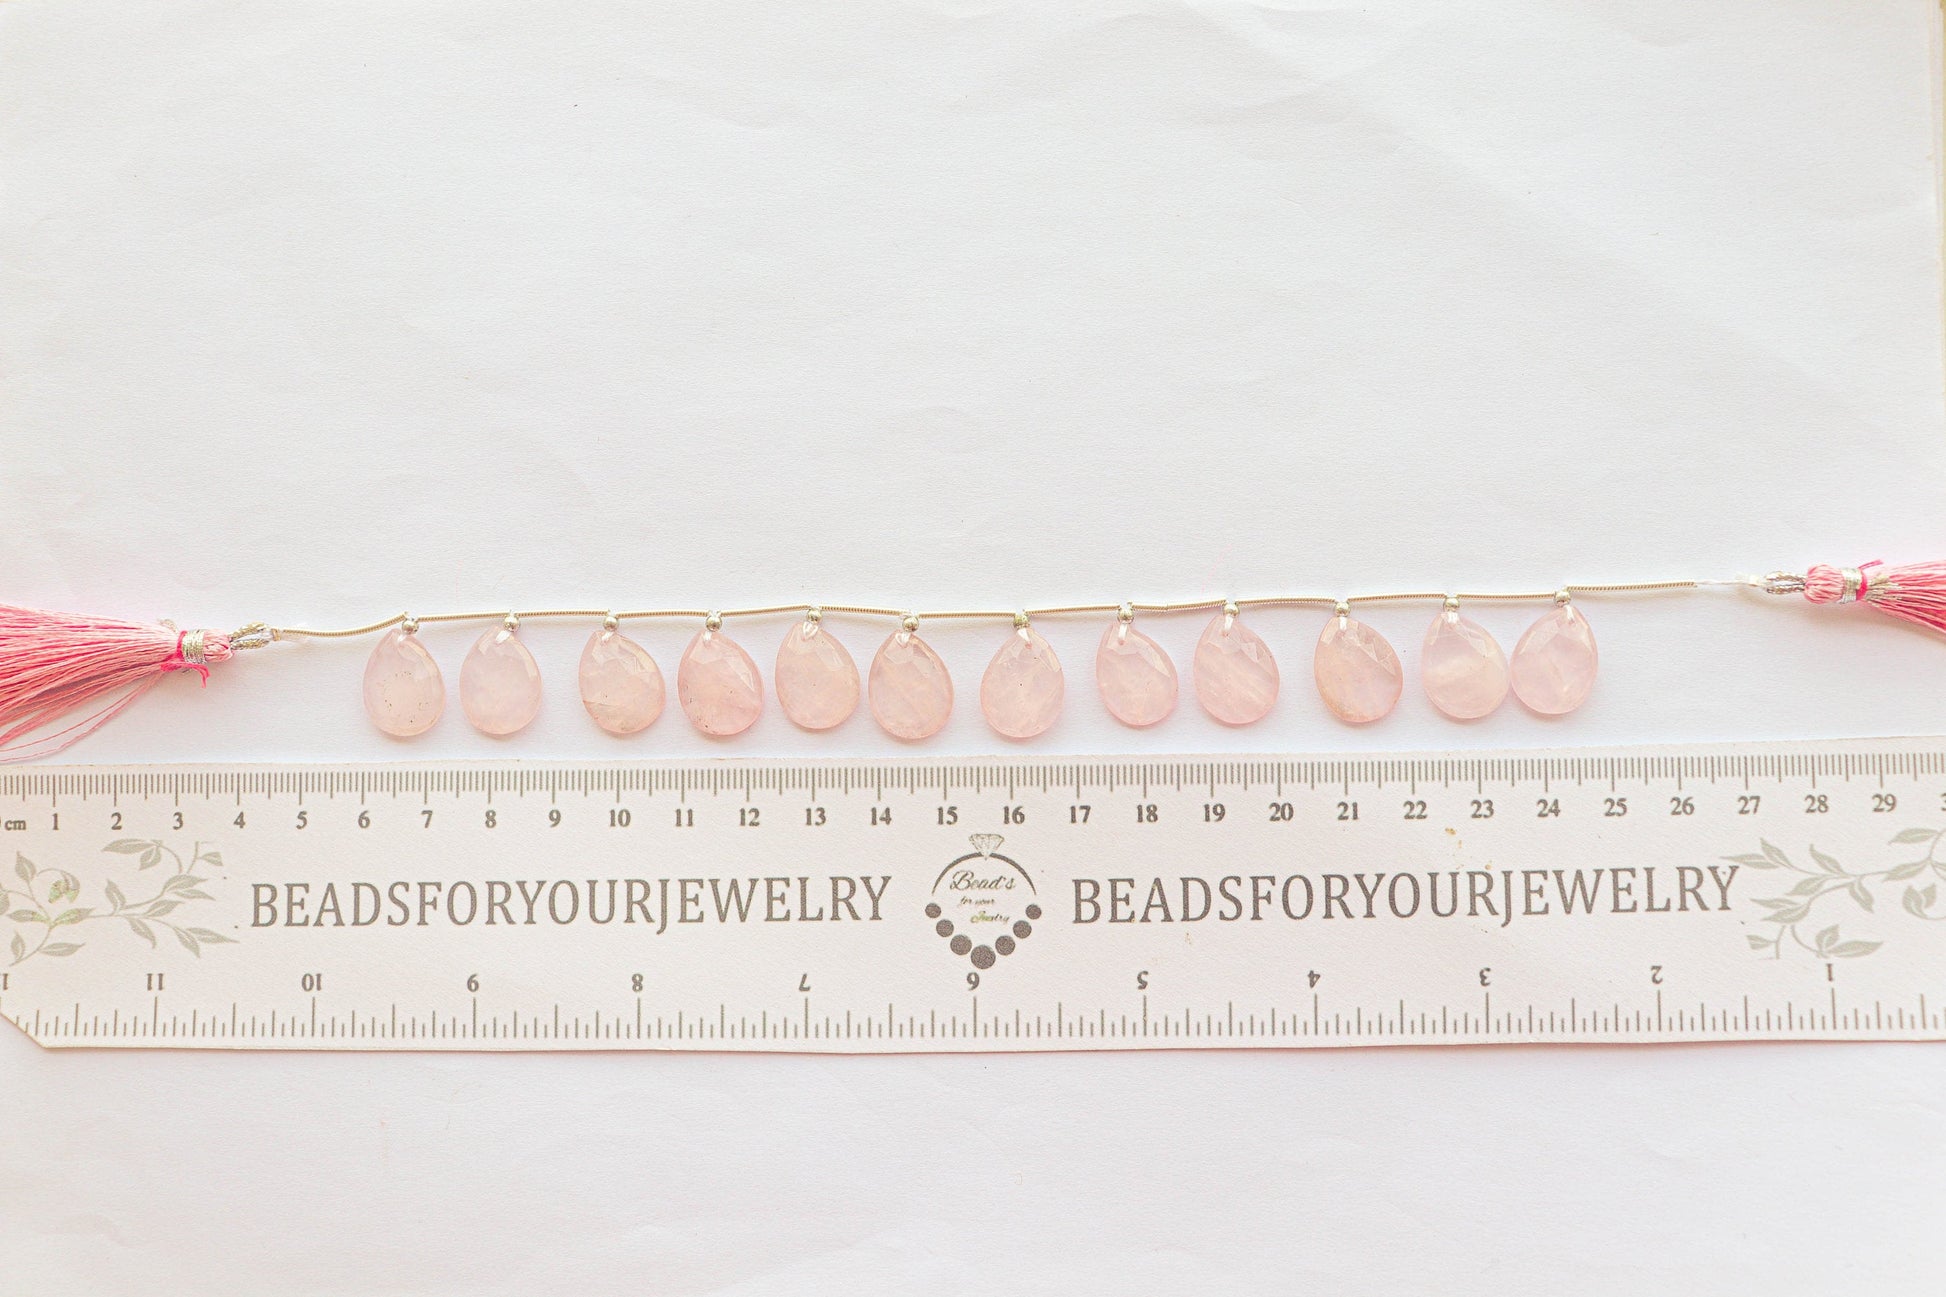 10 Pcs Rose Quartz Pear Shape Rose Cut Beads | 12x16mm | 8 inch | Front Drill | Natural Gemstone for Jewelry | Beadsforyourjewellery Beadsforyourjewelry